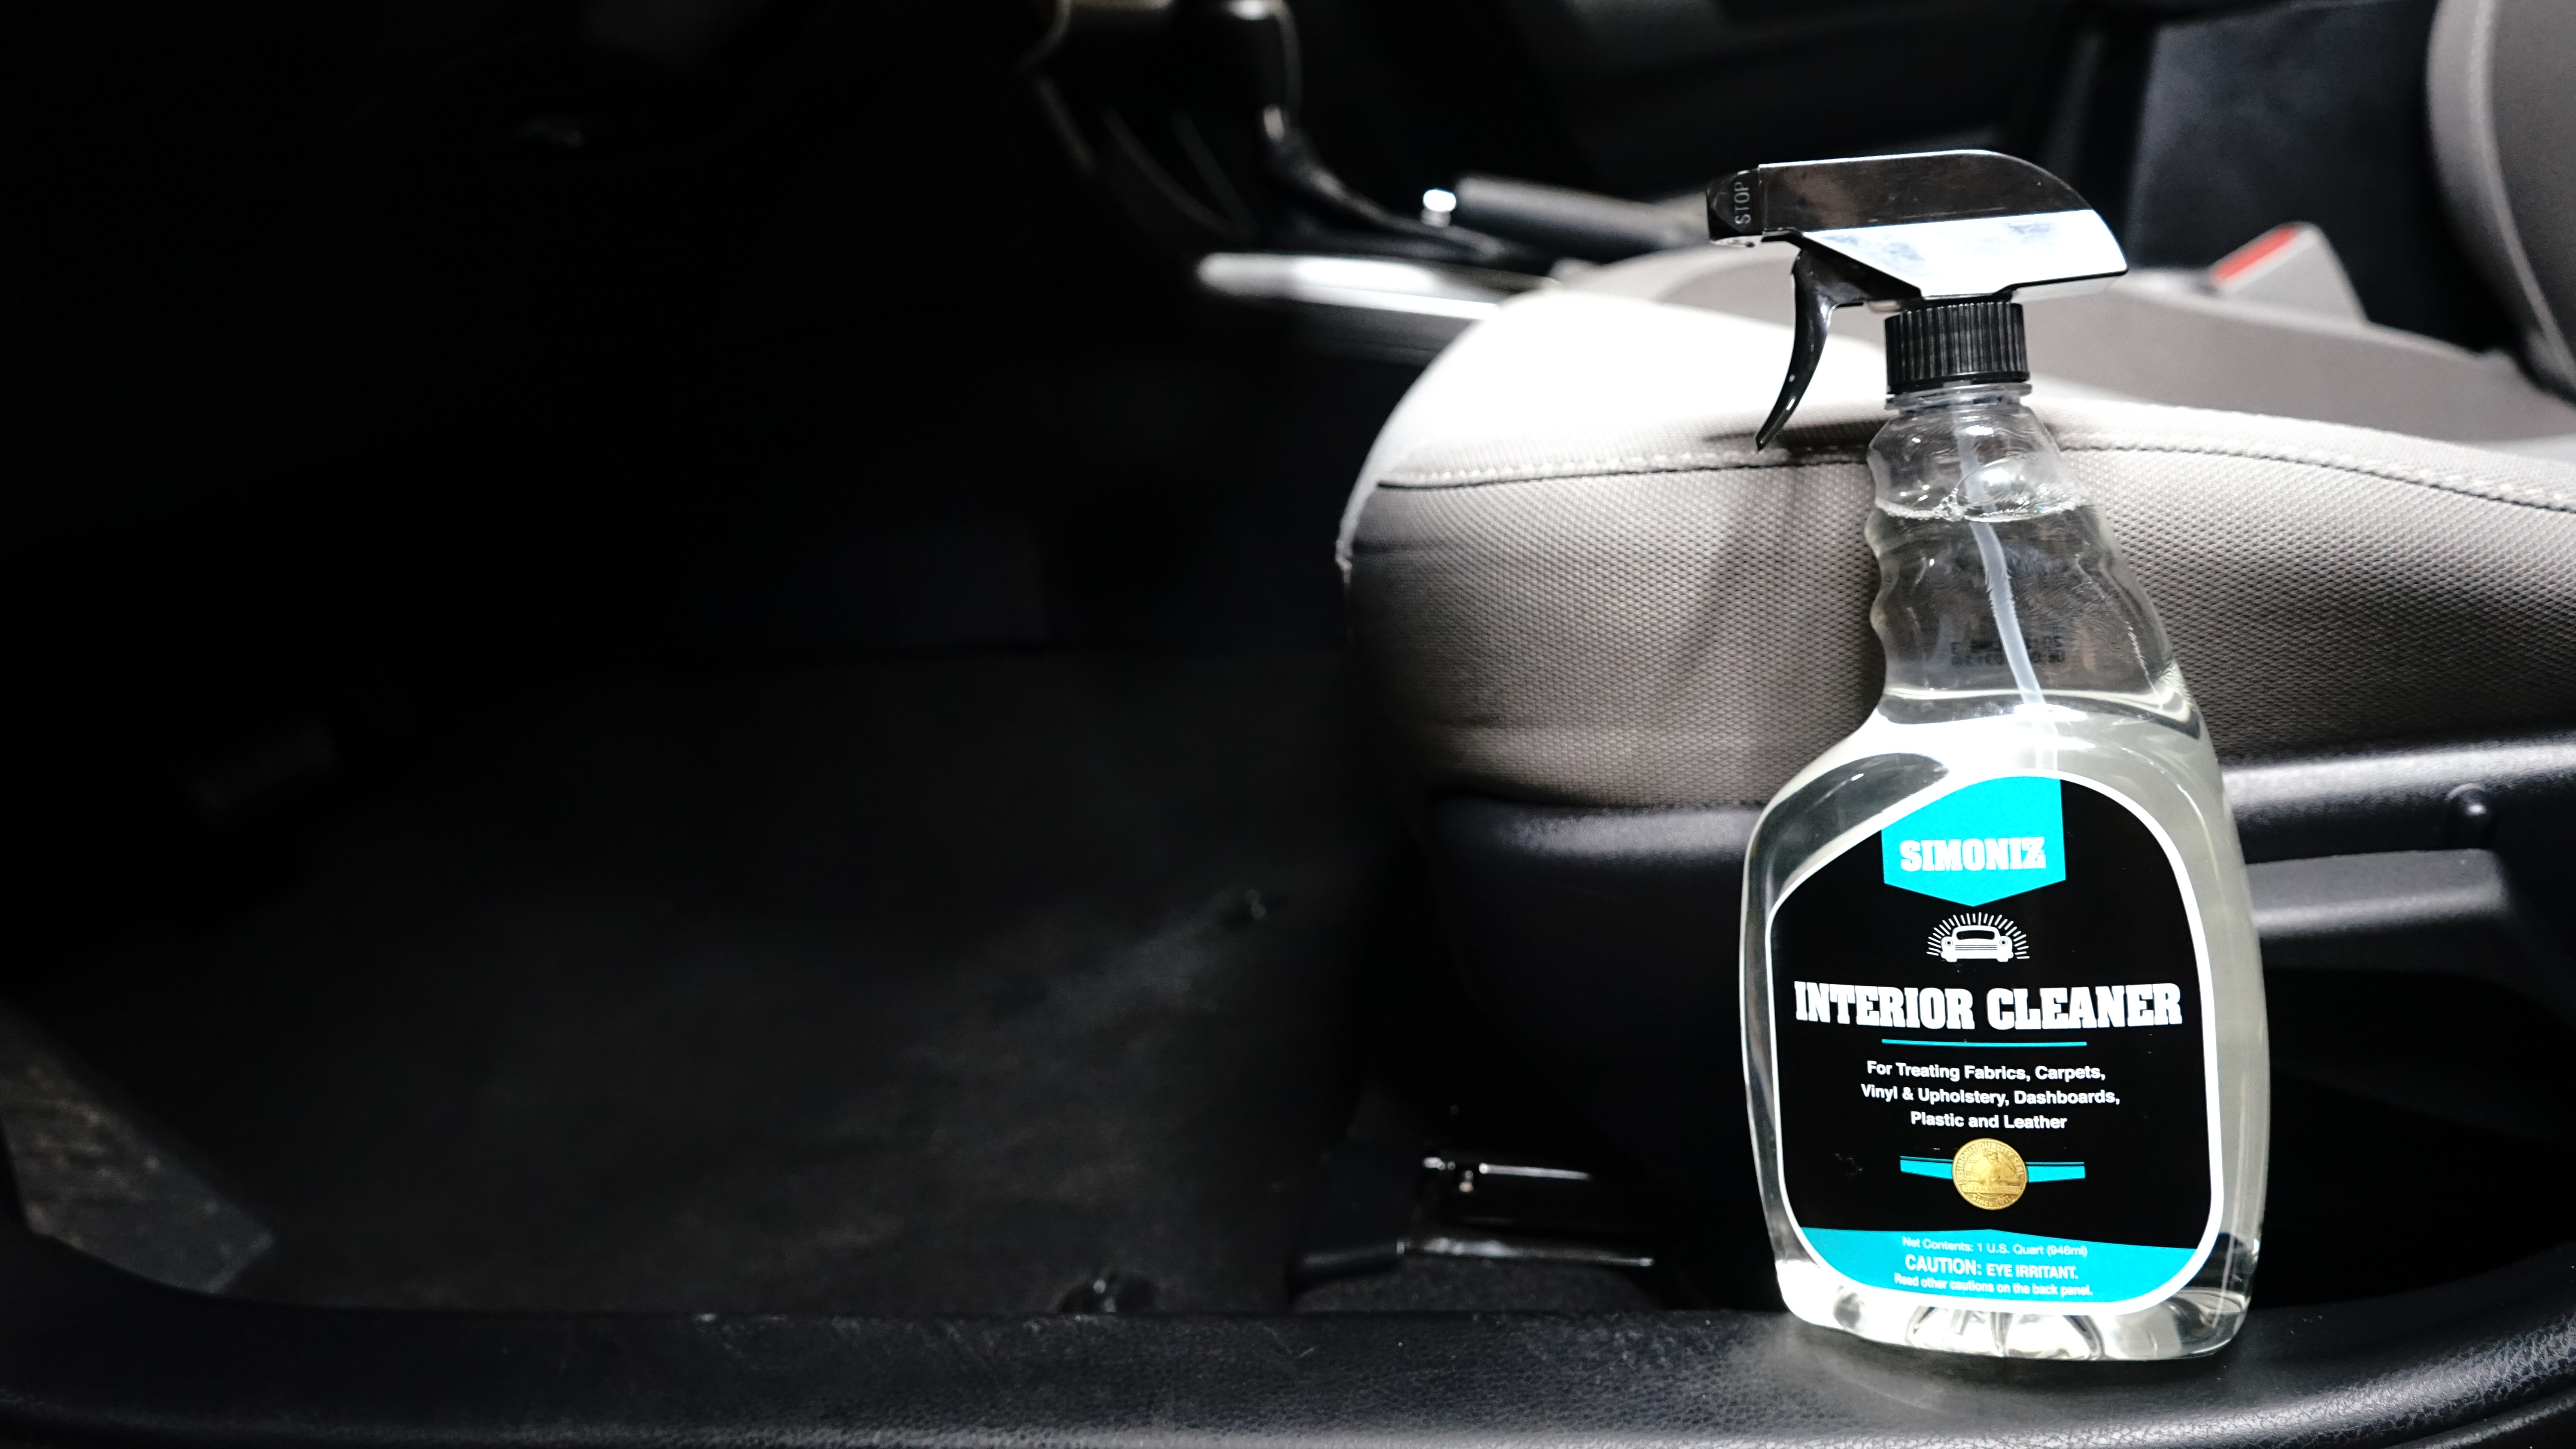 Black Beauty Water Based Tire Shine and Dressing